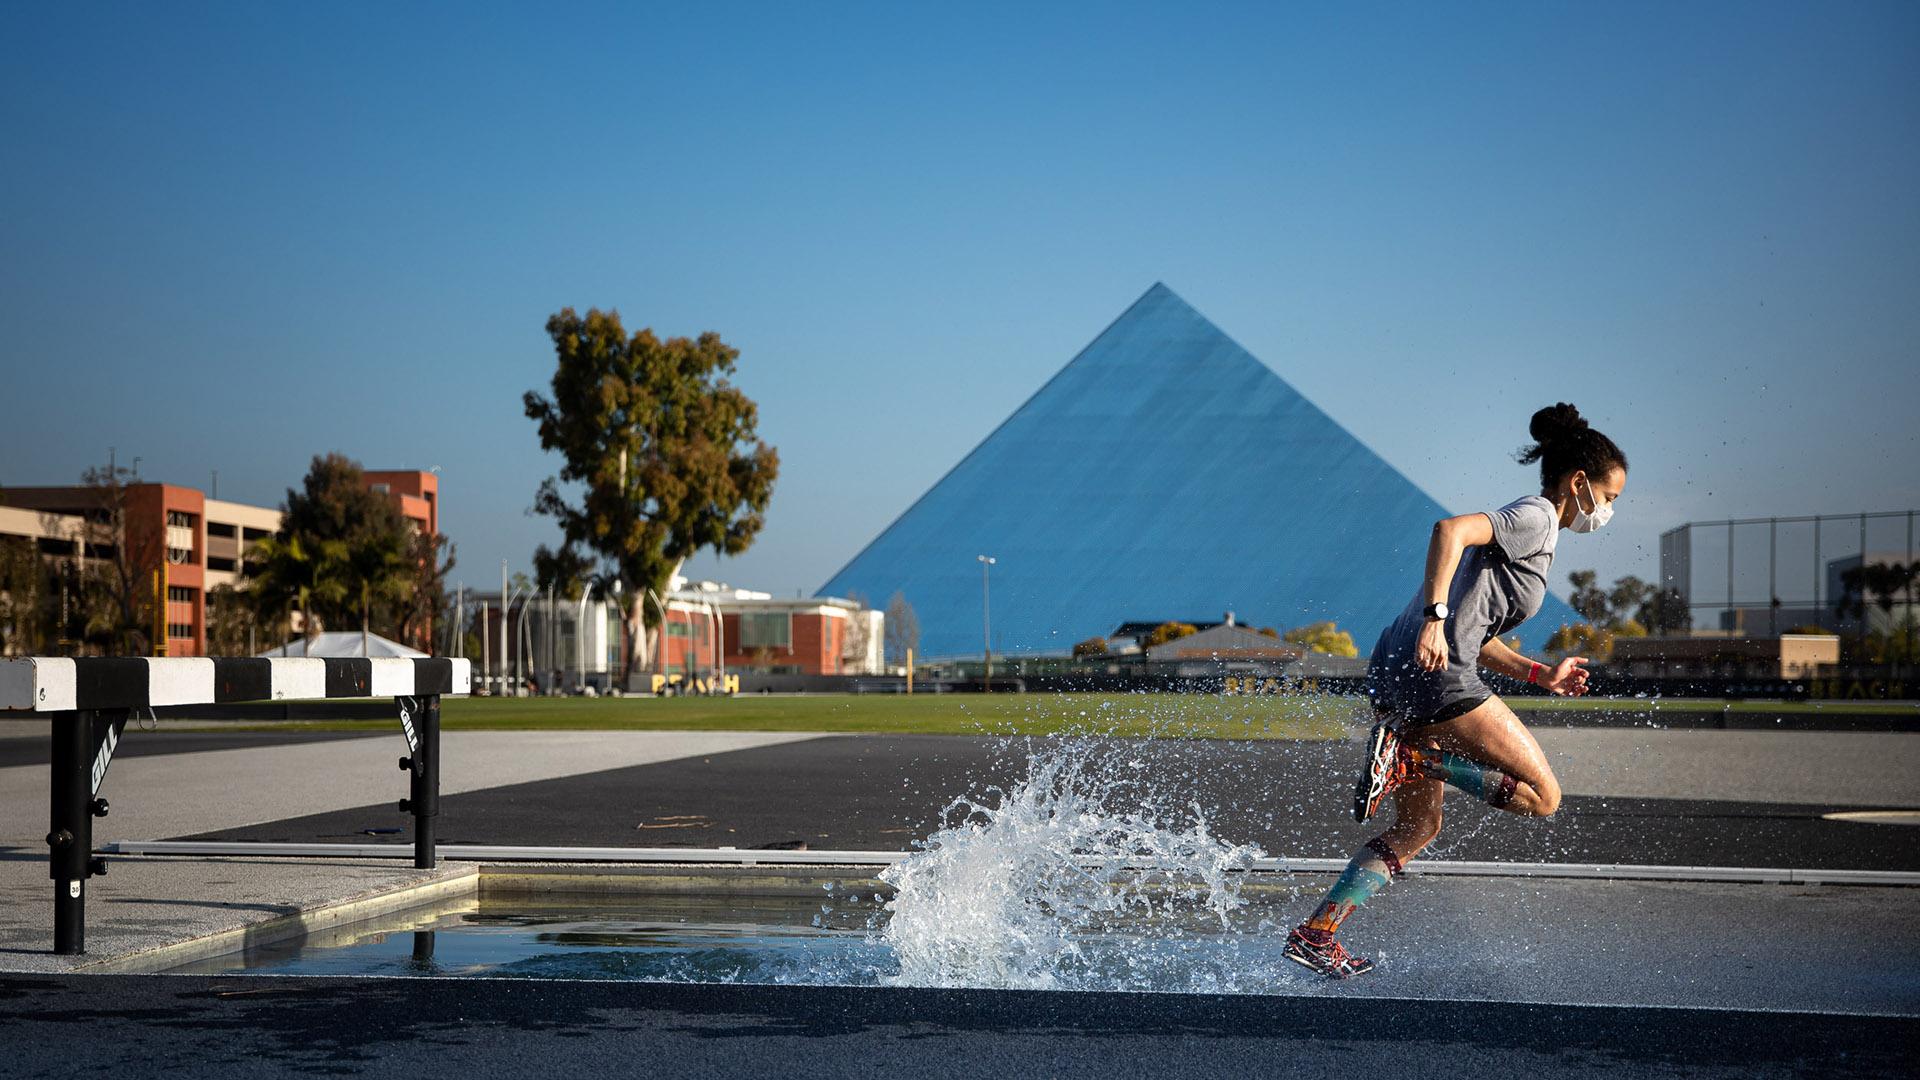 Runner creates splash running in Steeple chase with Pyramid in background